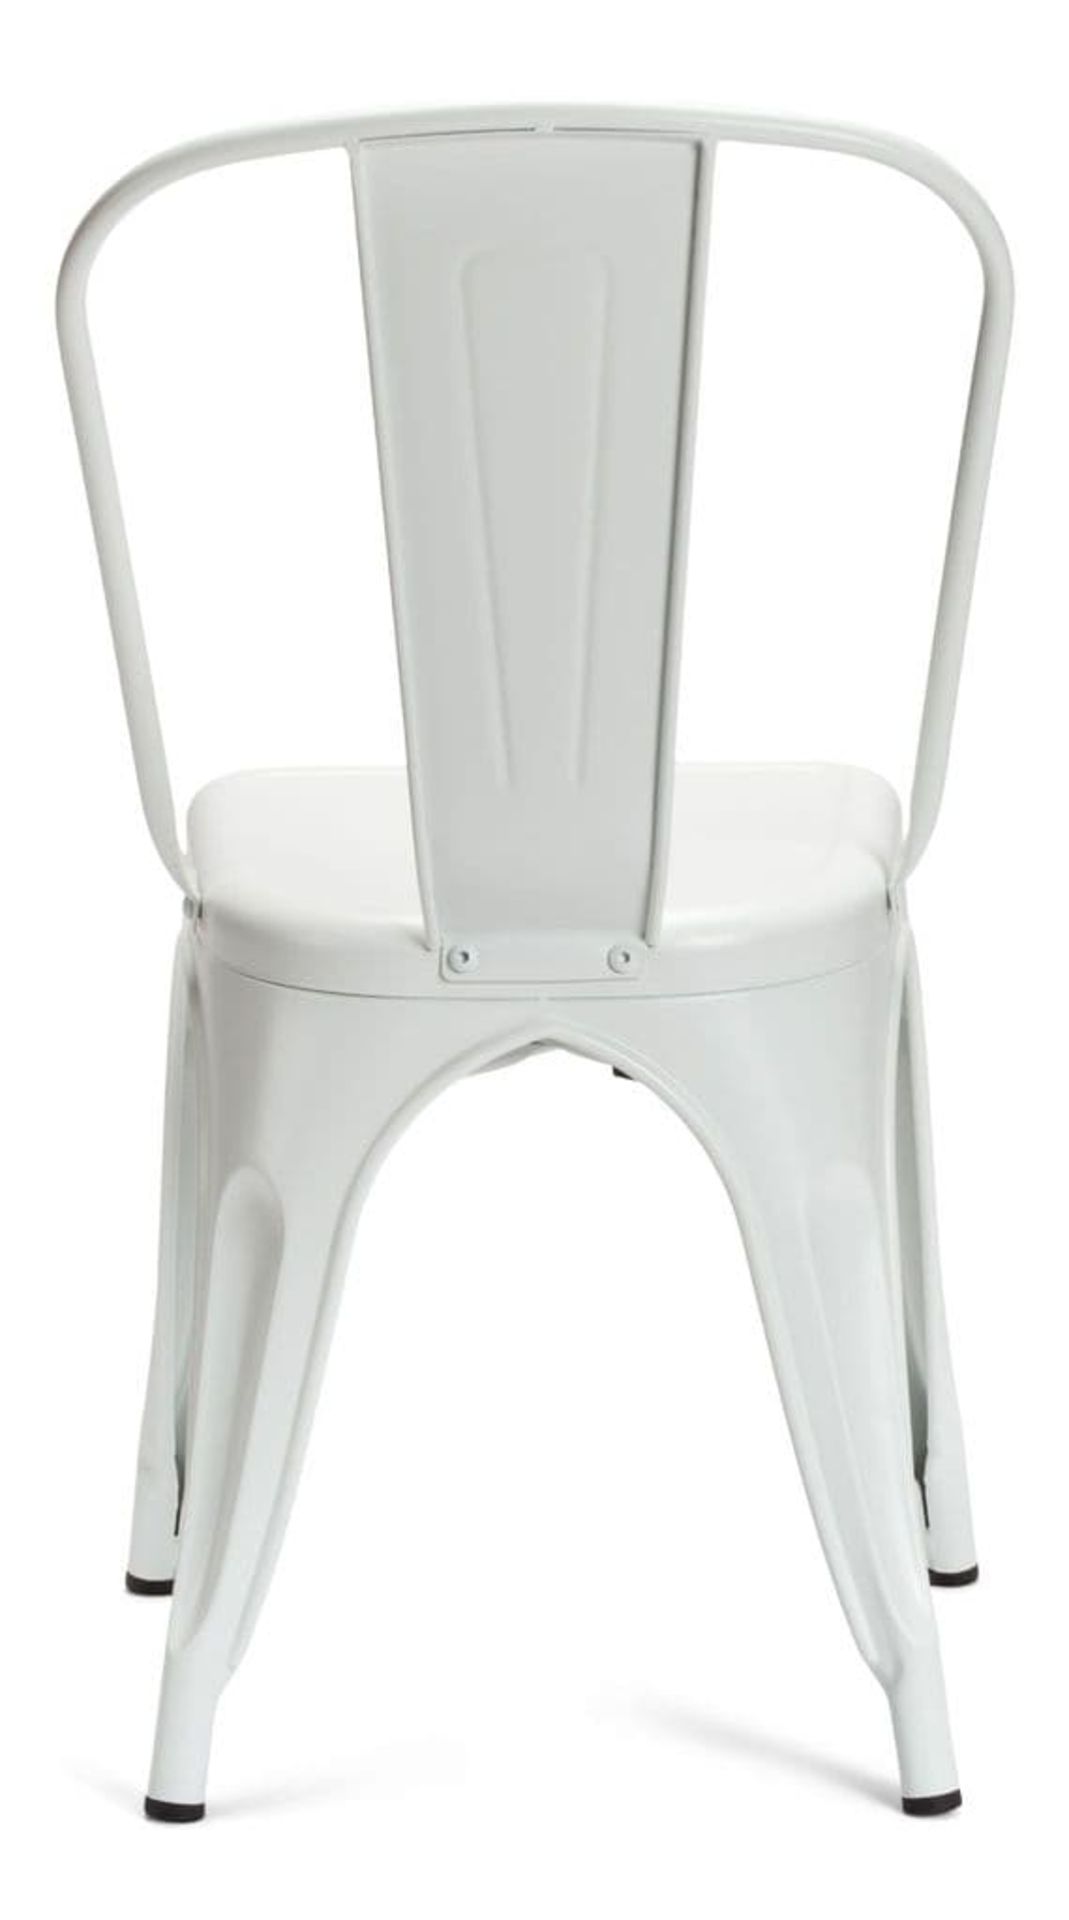 1 x Tolix Industrial Style Outdoor Bistro Table and Chair Set in White- Includes 1 x Table and 4 x - Image 8 of 14